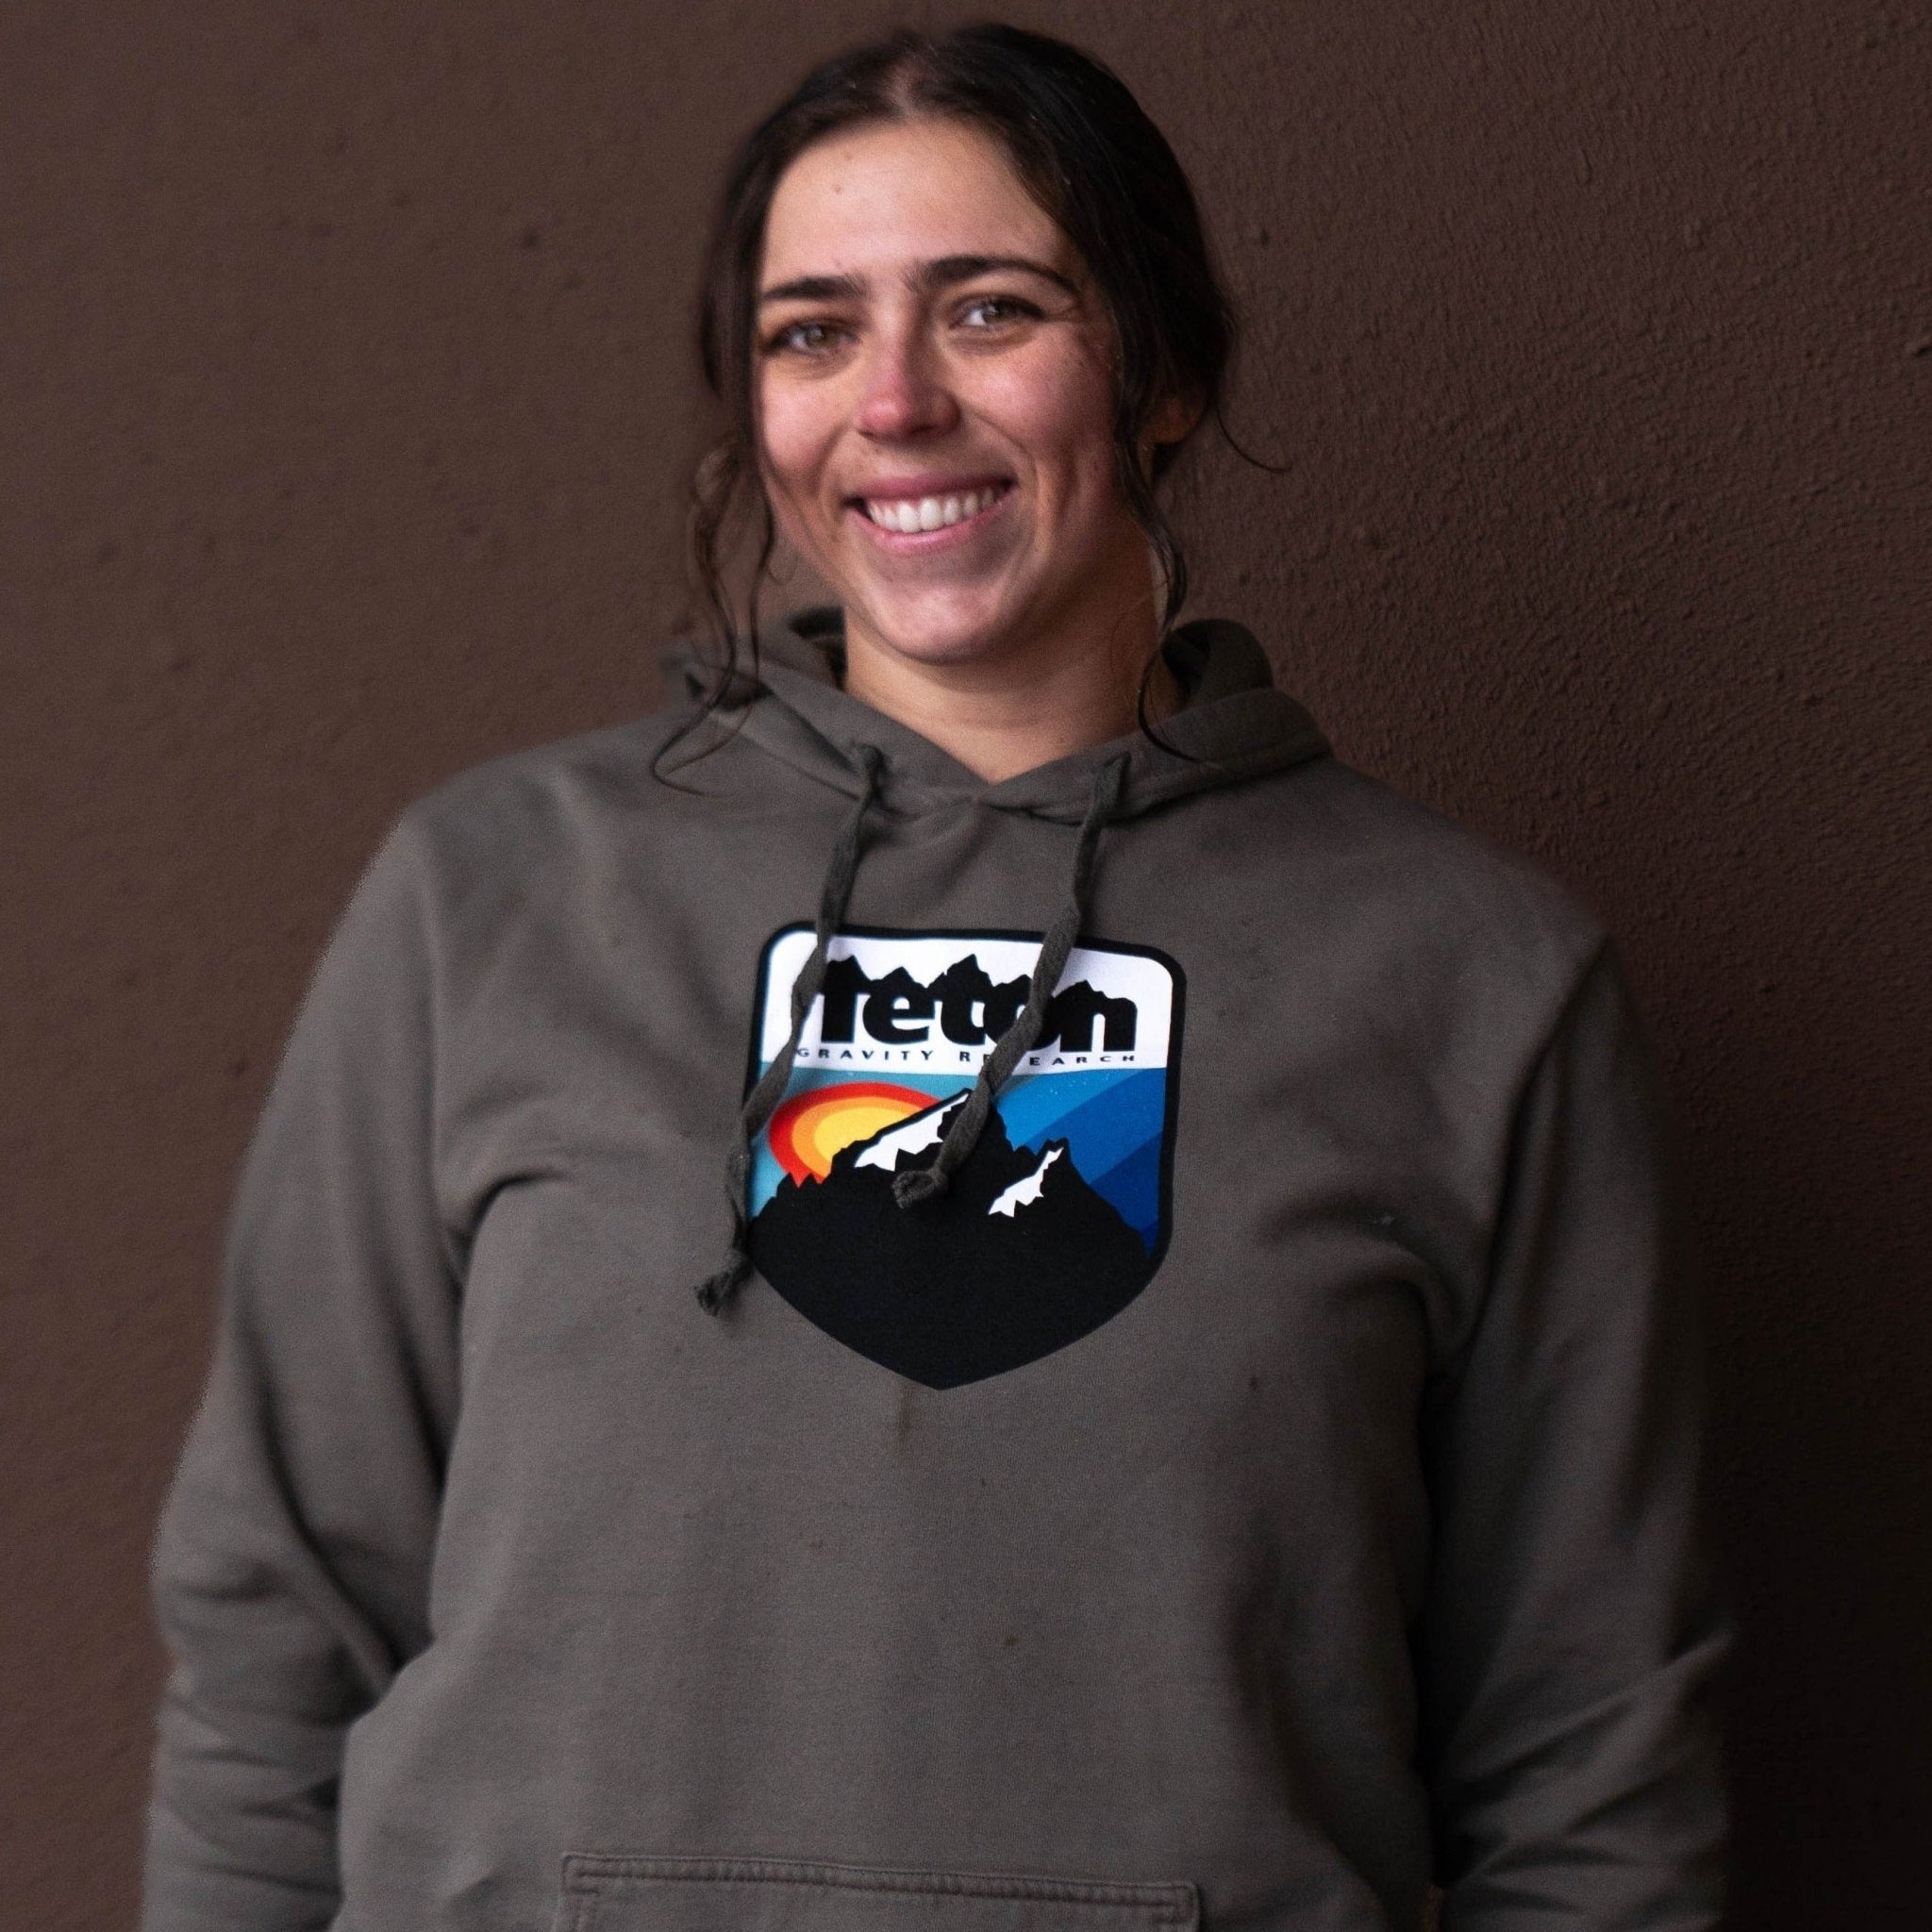 Retro Camp Hoodie 2.0 - Teton Gravity Research. Army green colored sweatshirt with Teton Gravity Research logo with mountains and colorful sunset.